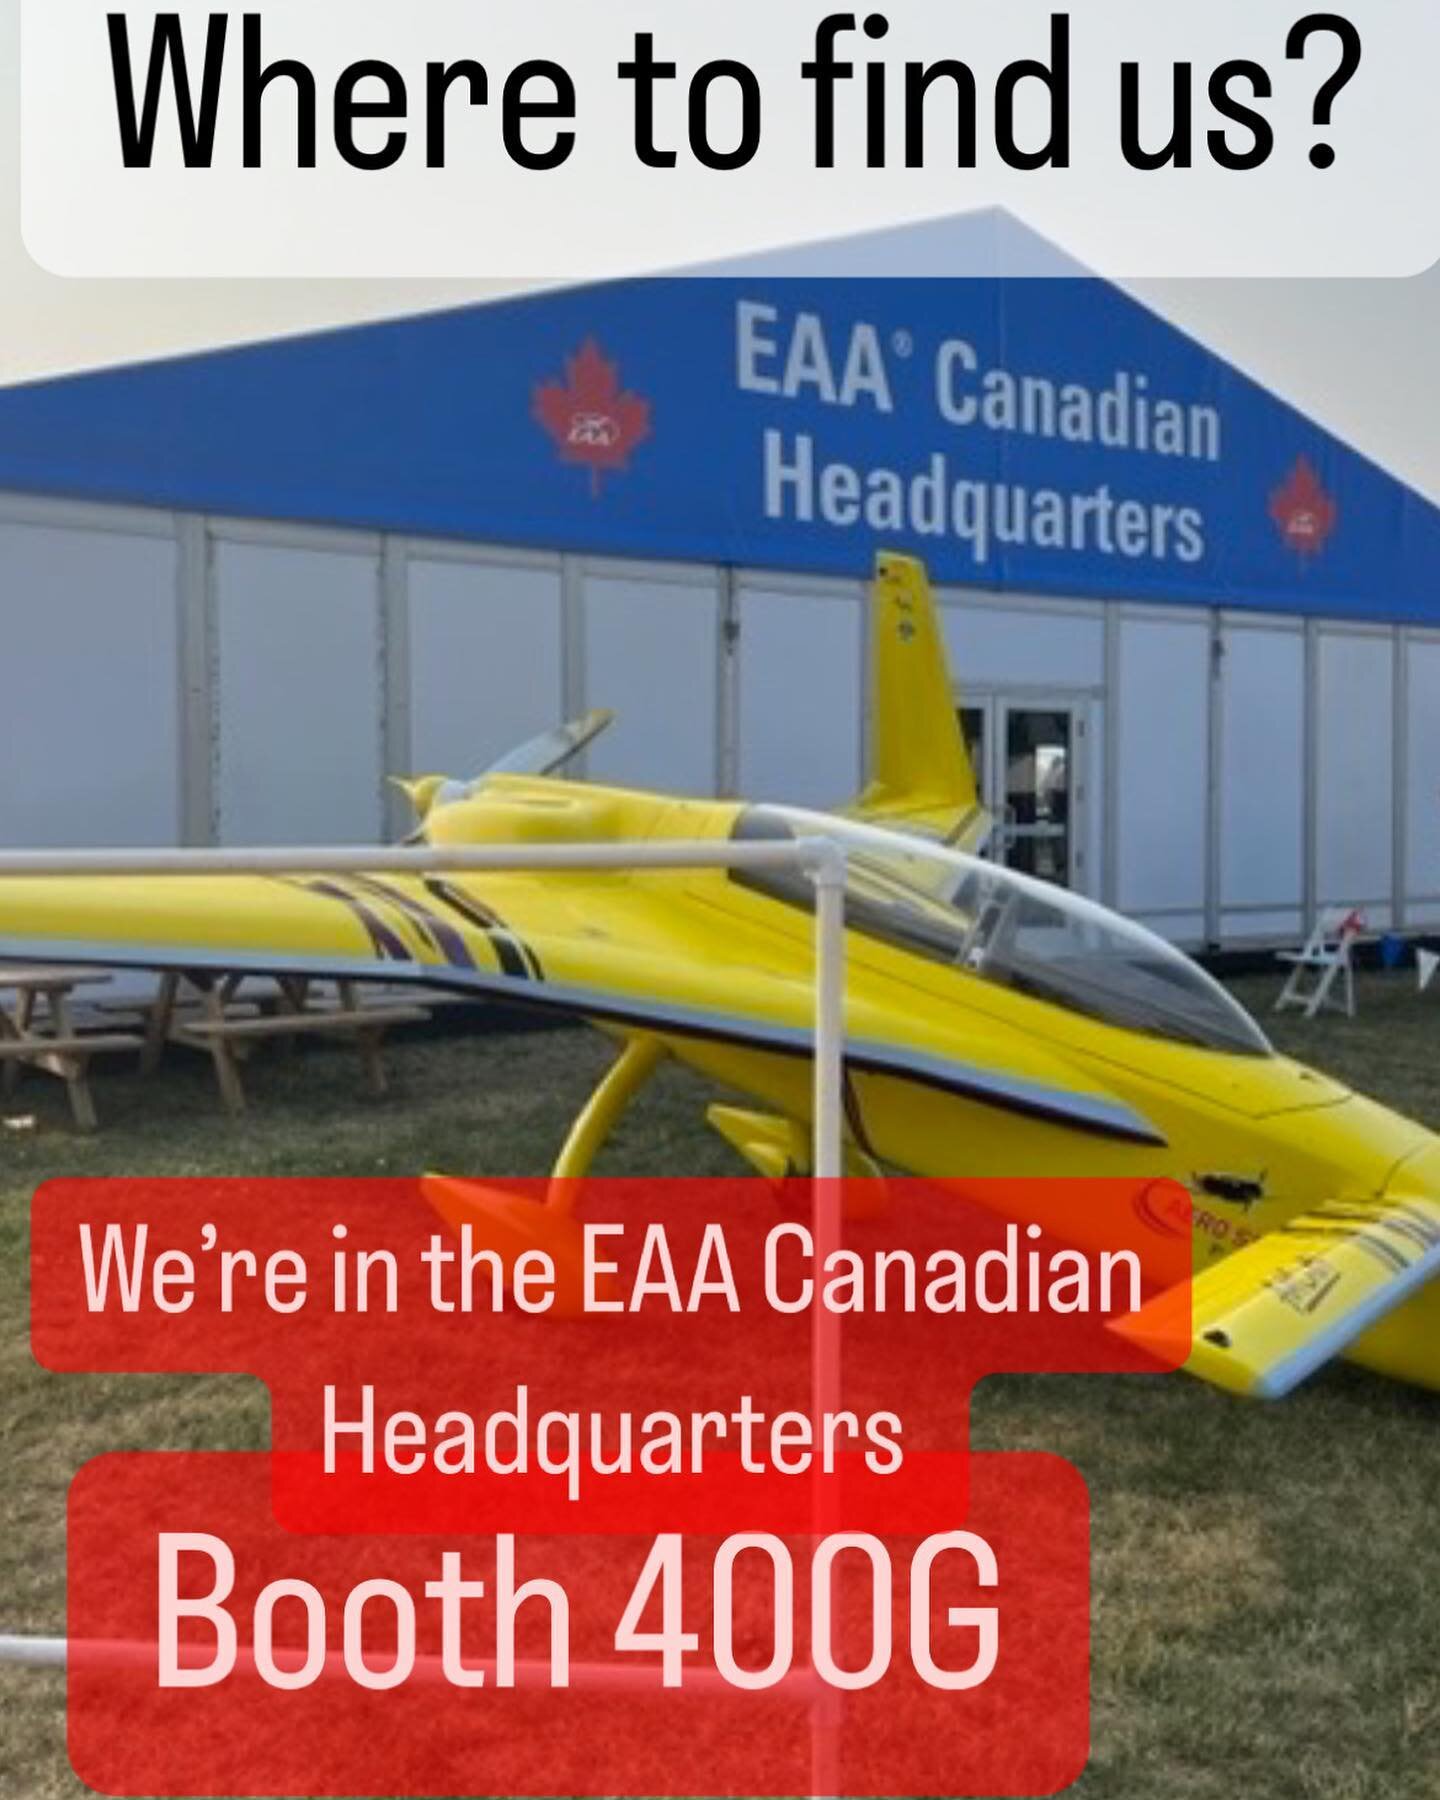 We&rsquo;re located in the EAA Canadian Headquarters. Near the Control Tower!!